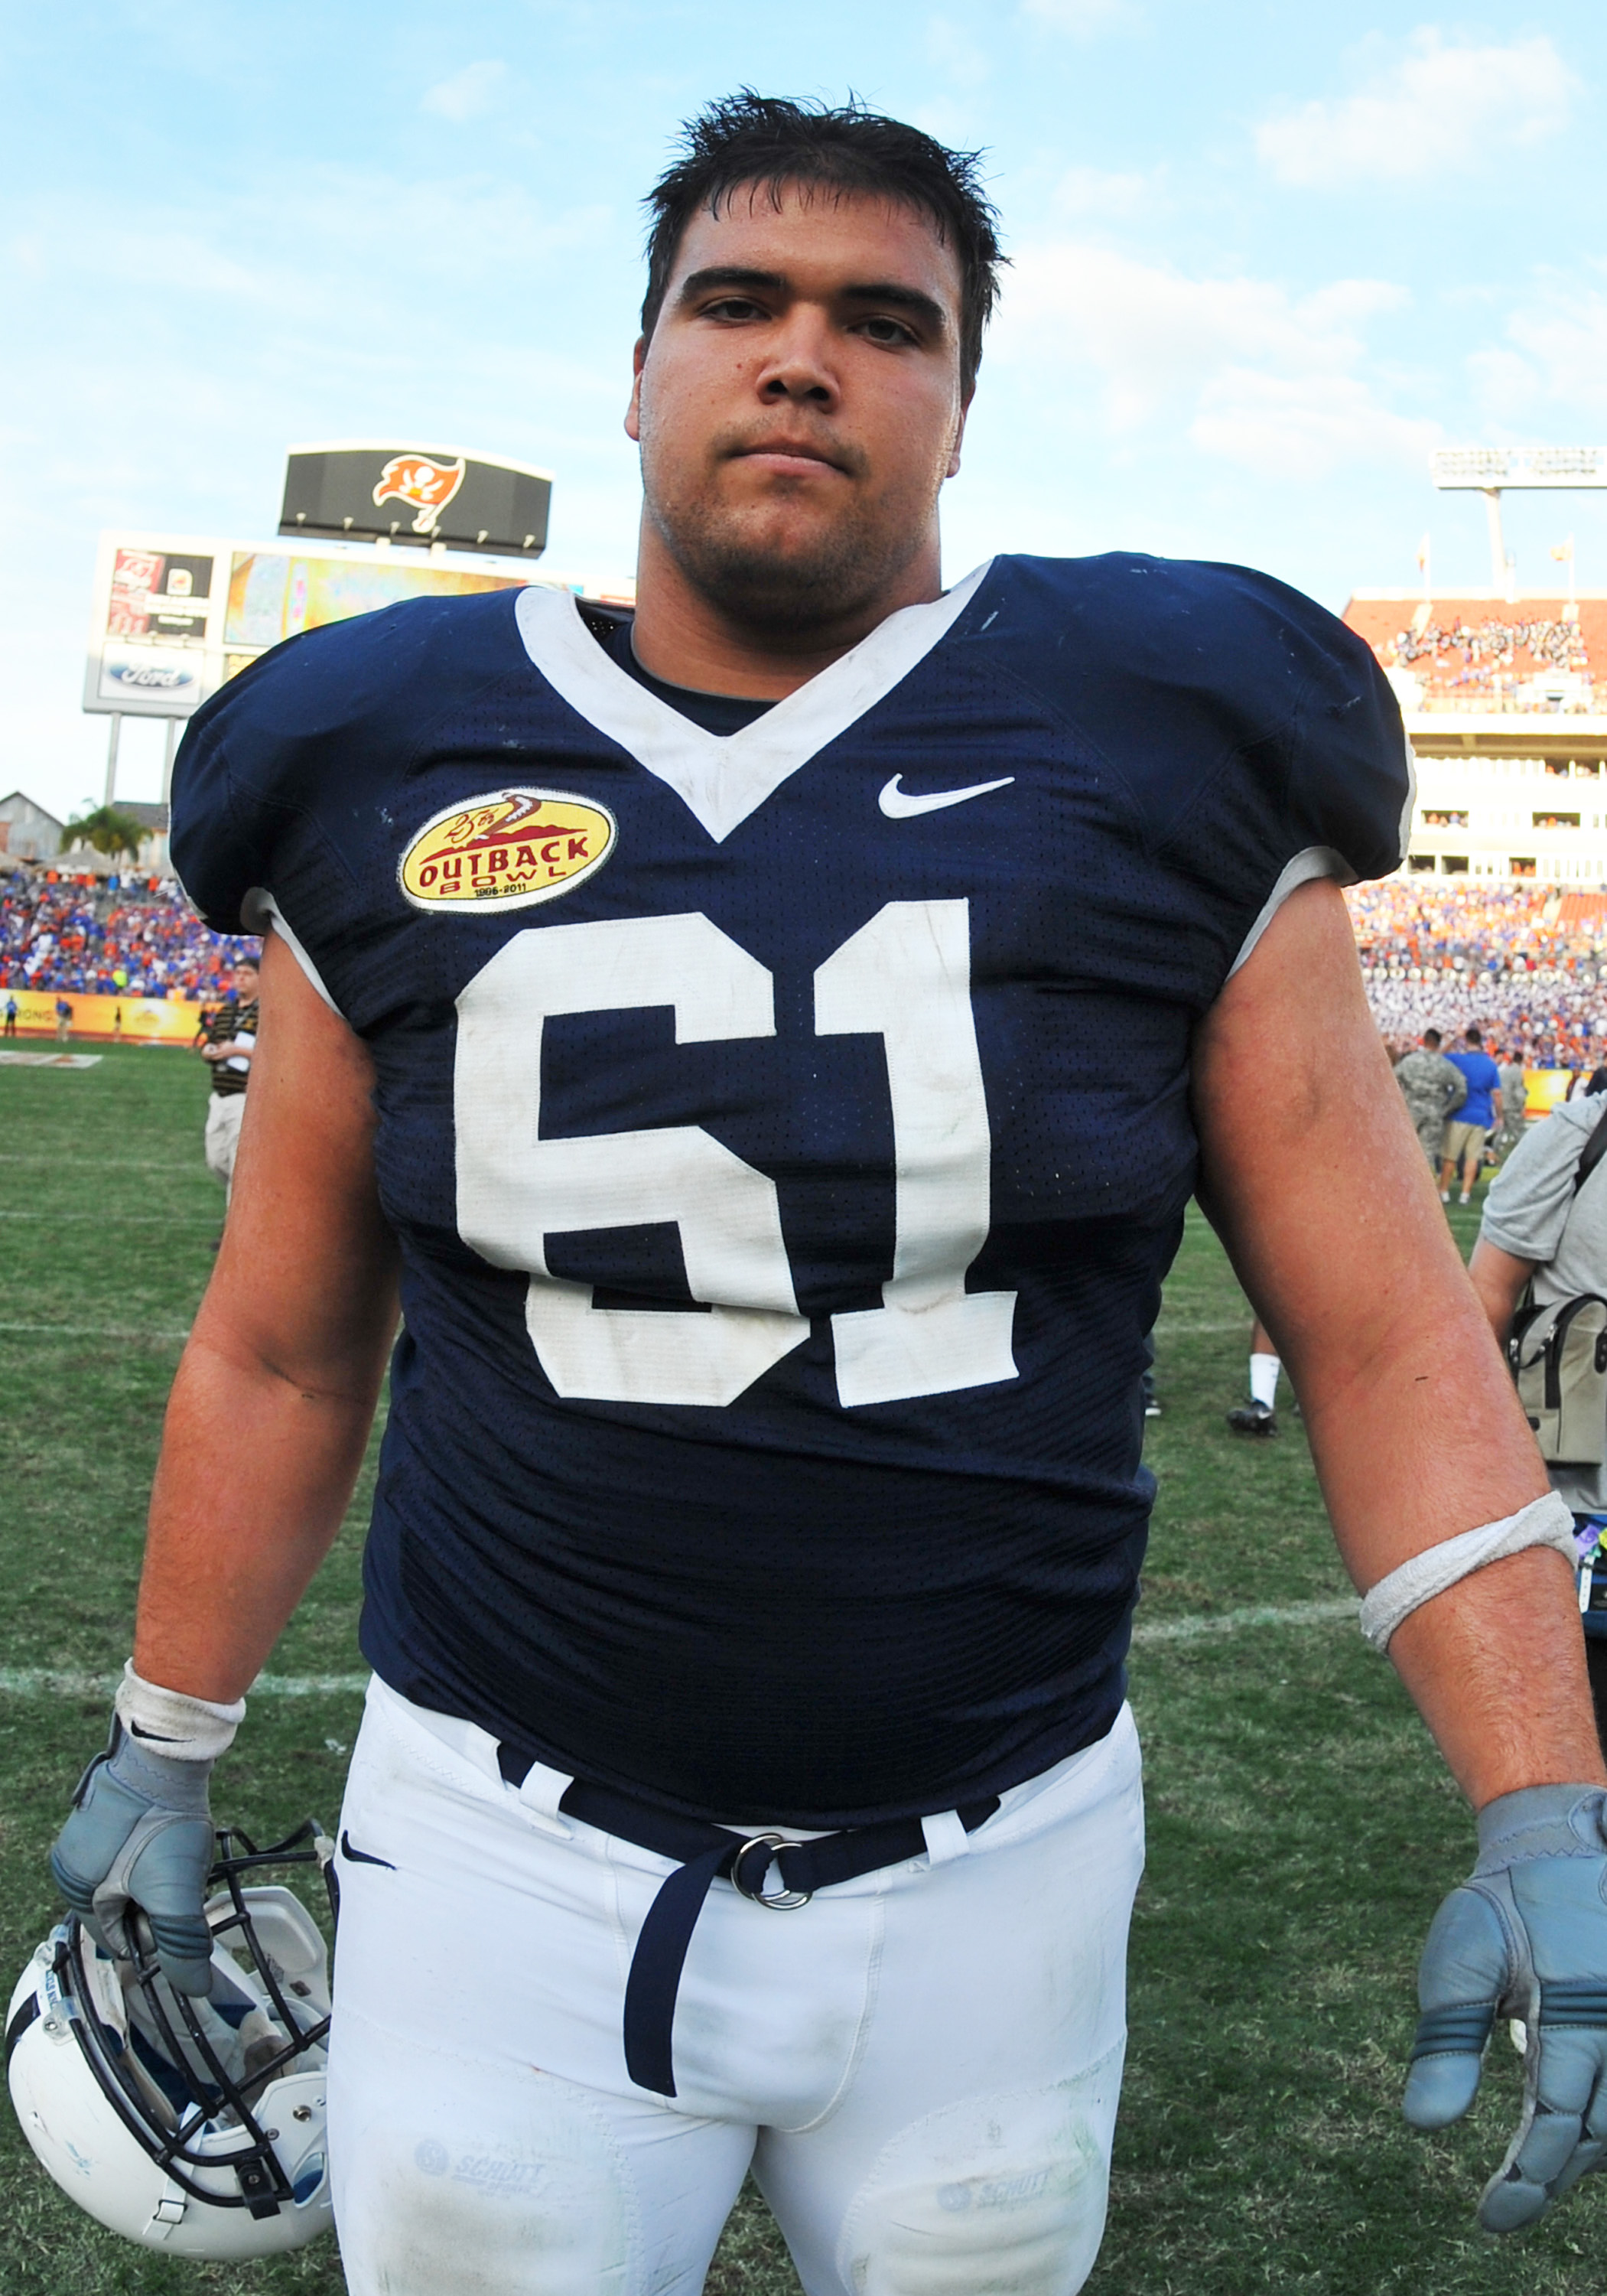 TAMPA, FL - JANUARY 1:  Guard Stefan Wisniewski #61 of the Penn State Nittany Lions leaves the field after play against the Florida Gators January 1, 2010 in the 25th Outback Bowl at Raymond James Stadium in Tampa, Florida.  (Photo by Al Messerschmidt/Get